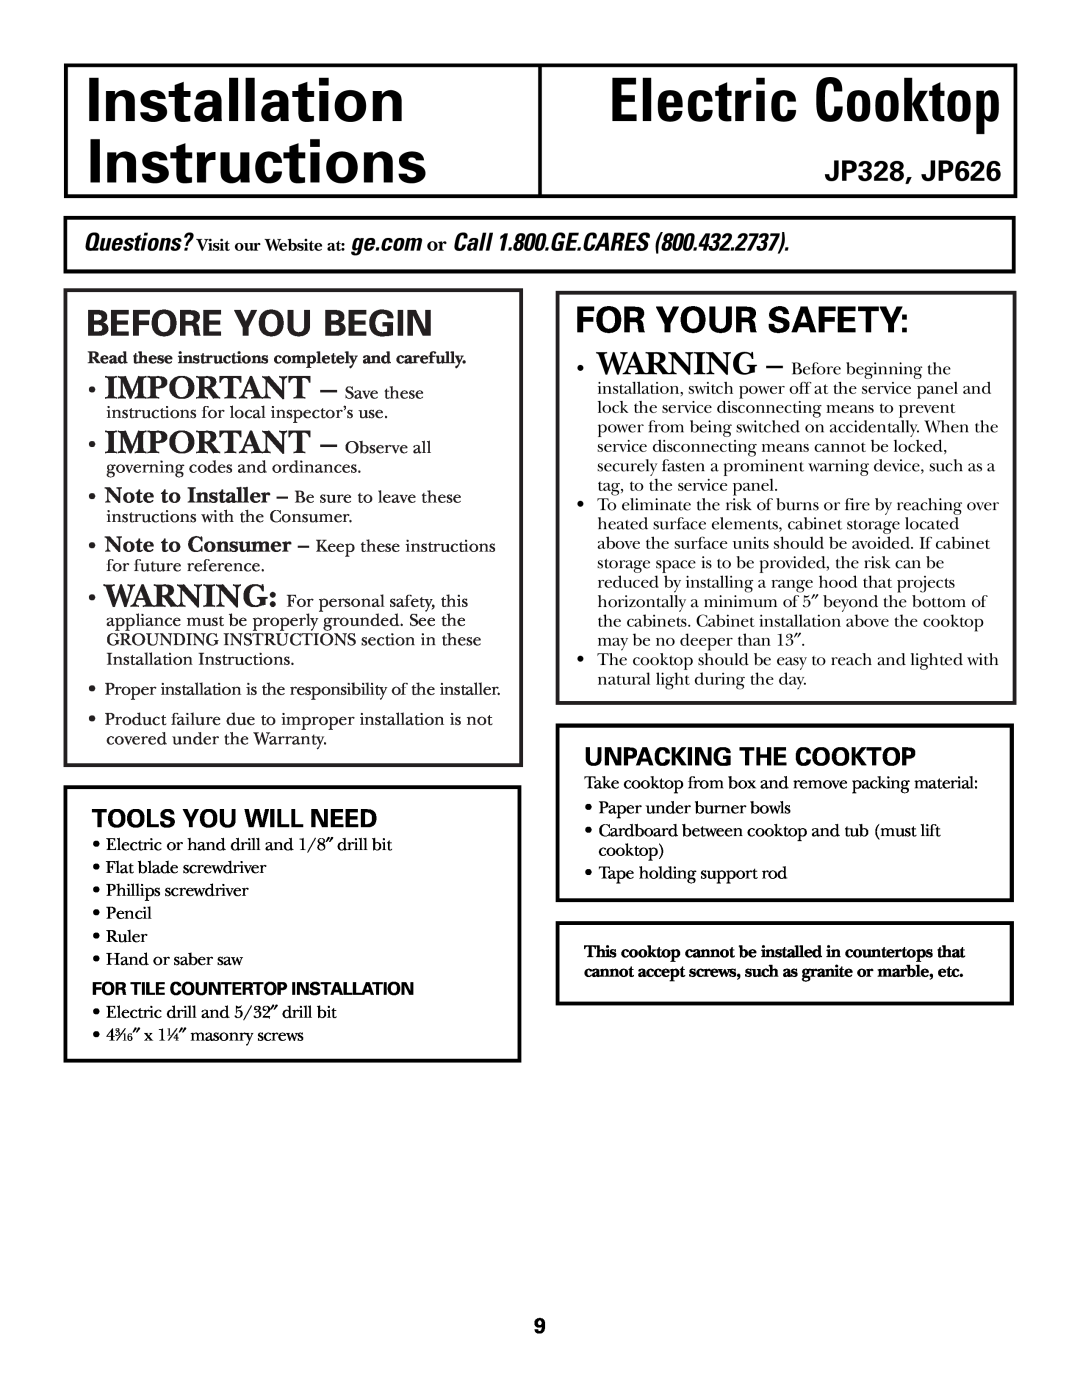 GE JP328 JP626 Installation Instructions, Electric Cooktop, Before You Begin, For Your Safety, IMPORTANT - Save these 